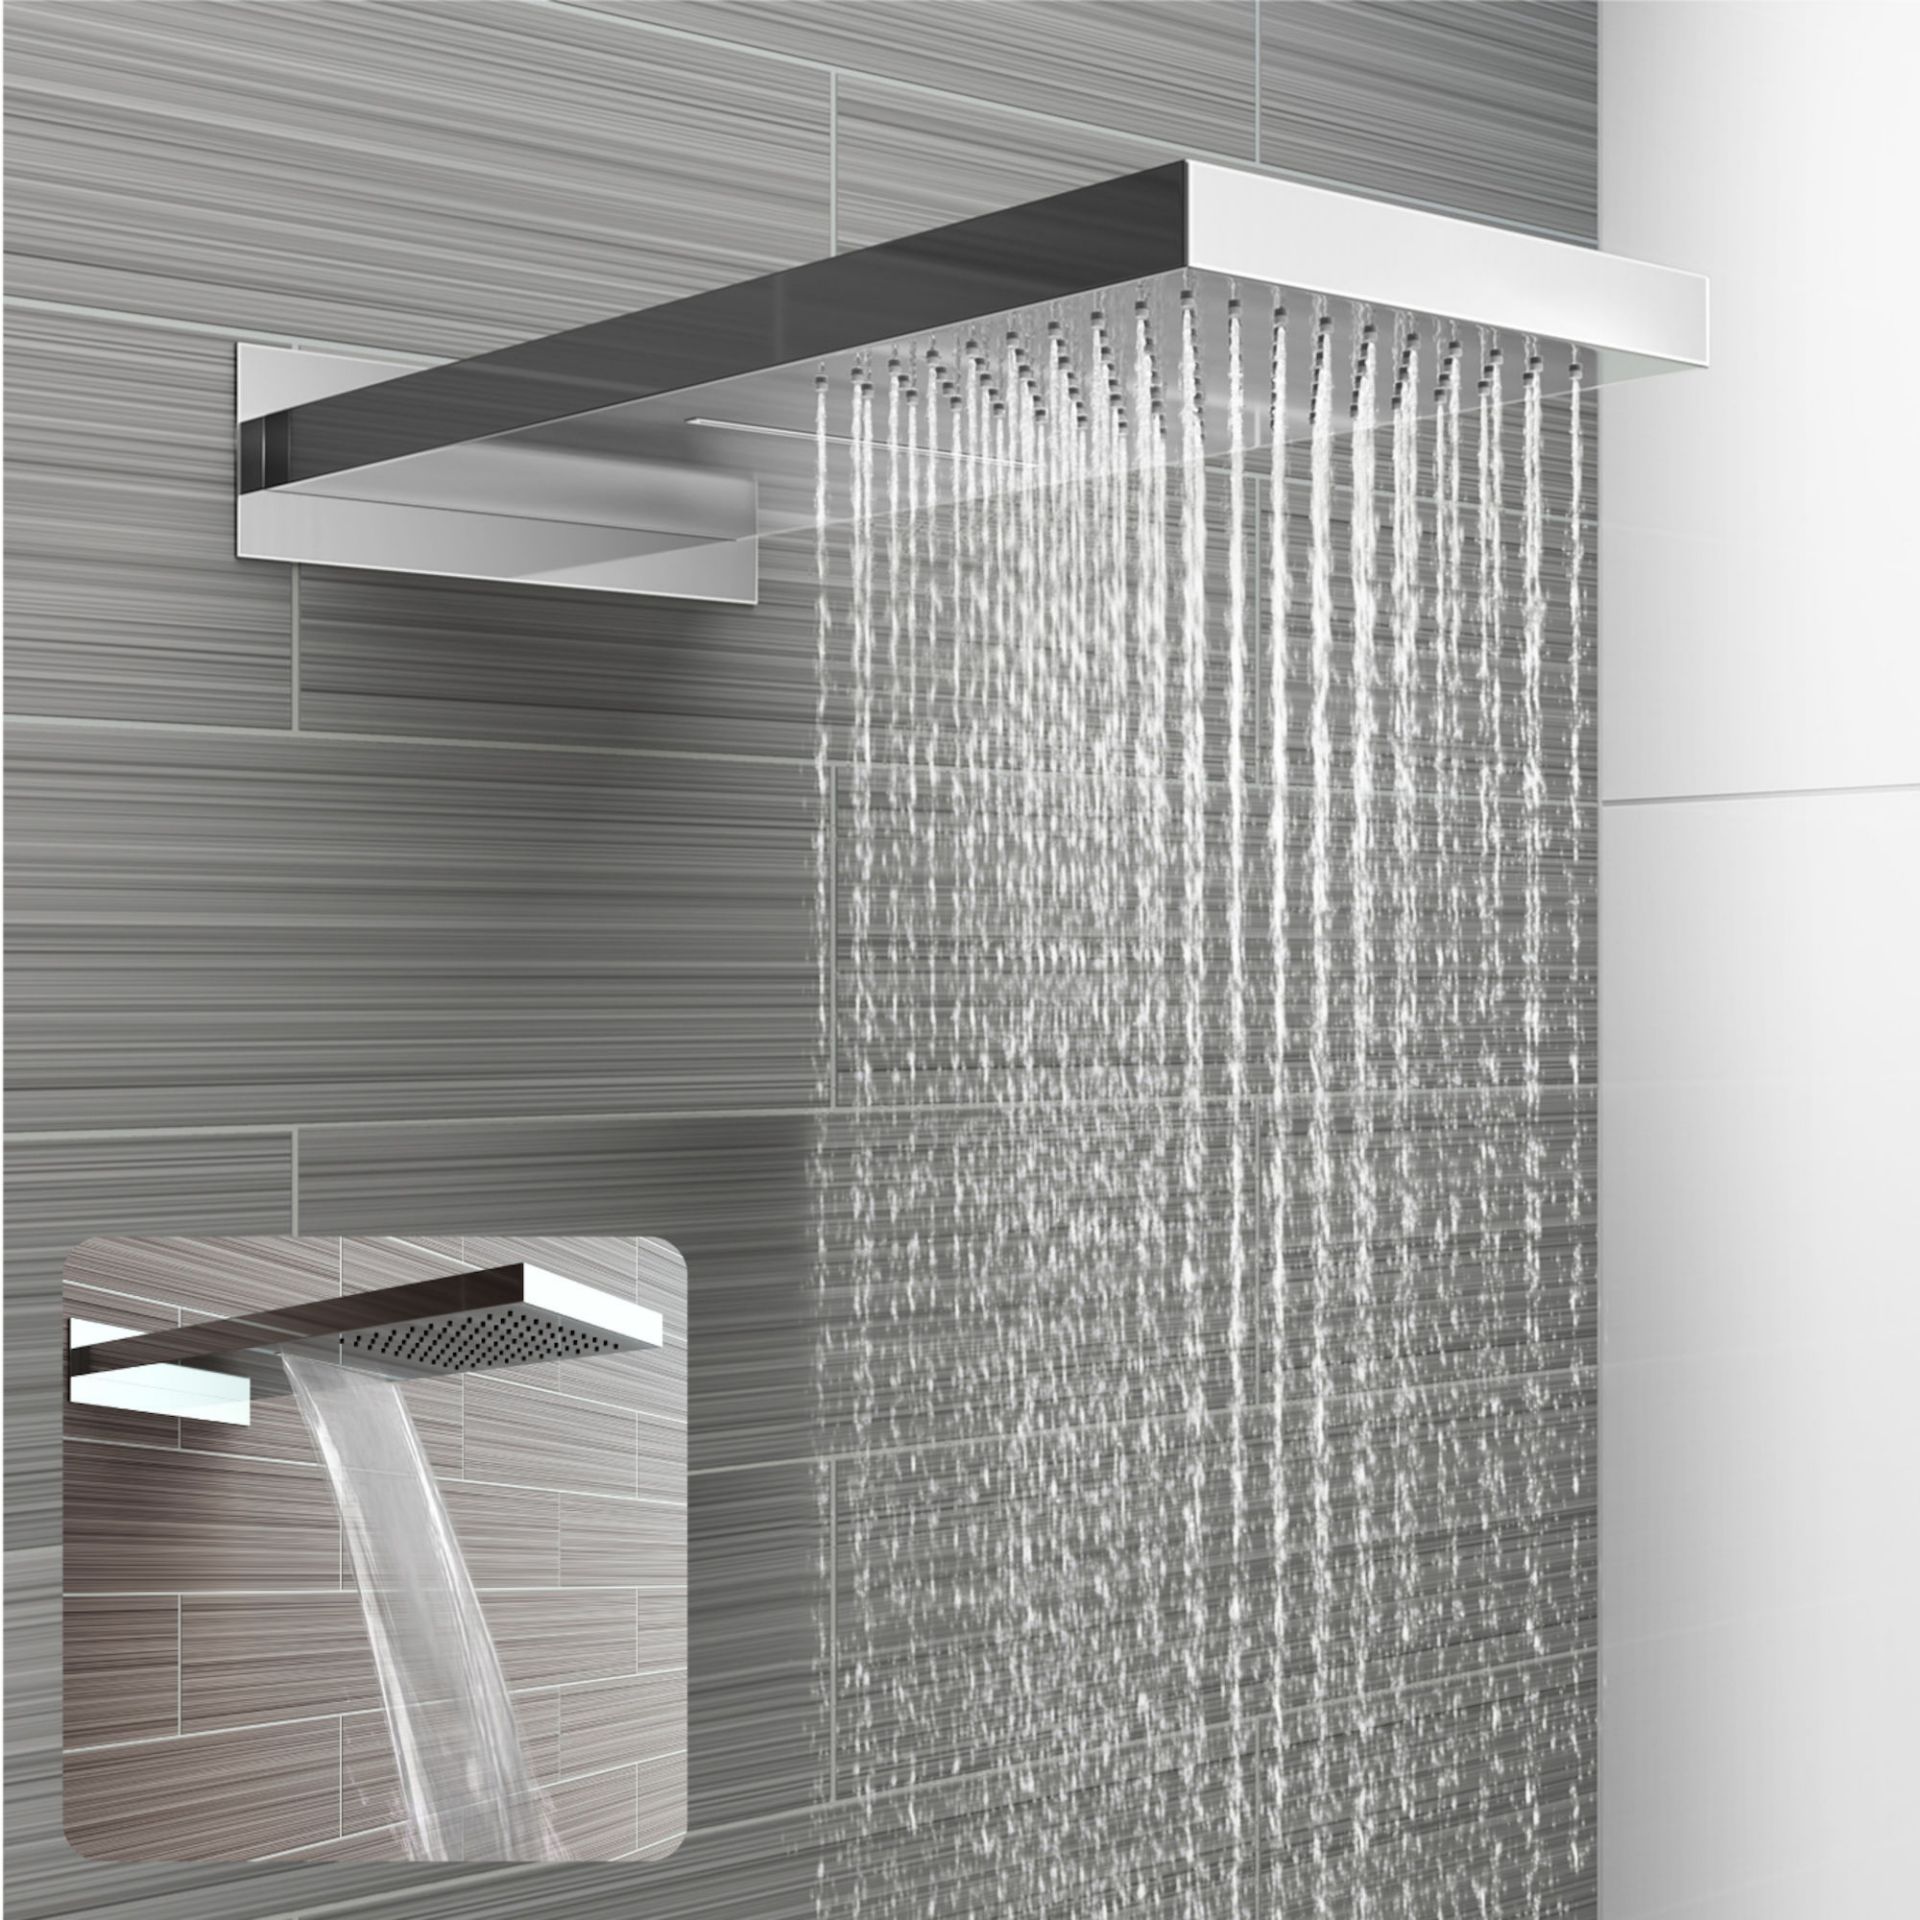 (CT7) 230x500mm Stainless Steel Waterfall Shower Head. RRP £374.98. Dual function waterfall and - Image 2 of 12